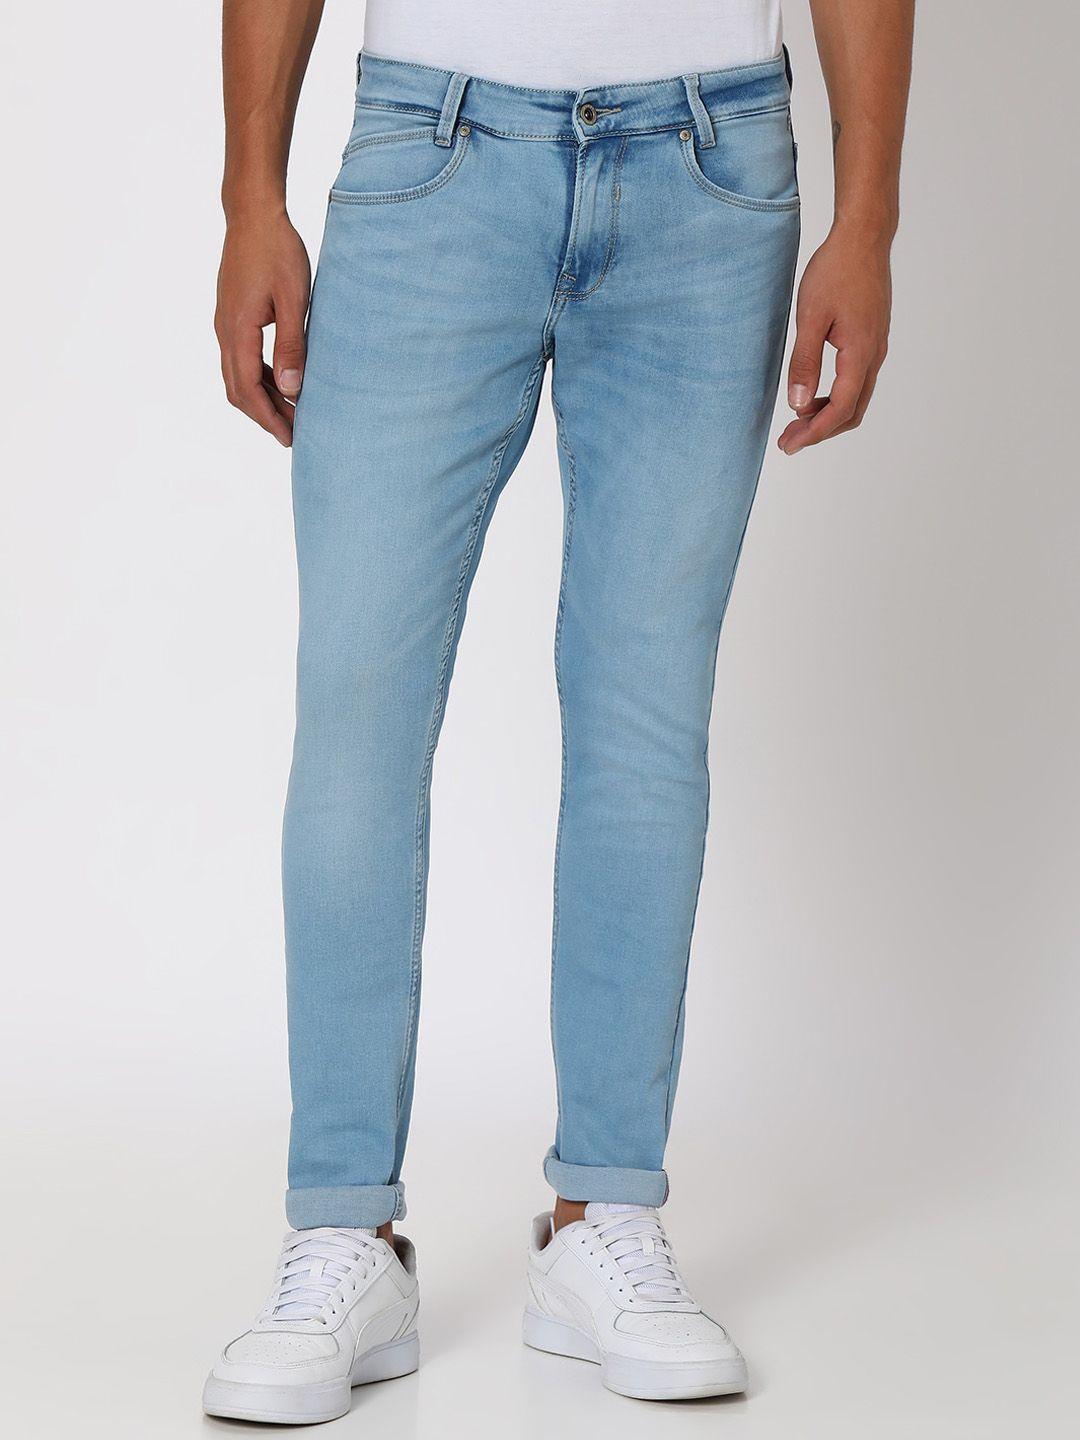 mufti-men-skinny-fit-mid-rise-light-shade-clean-look-stretchable-jeans